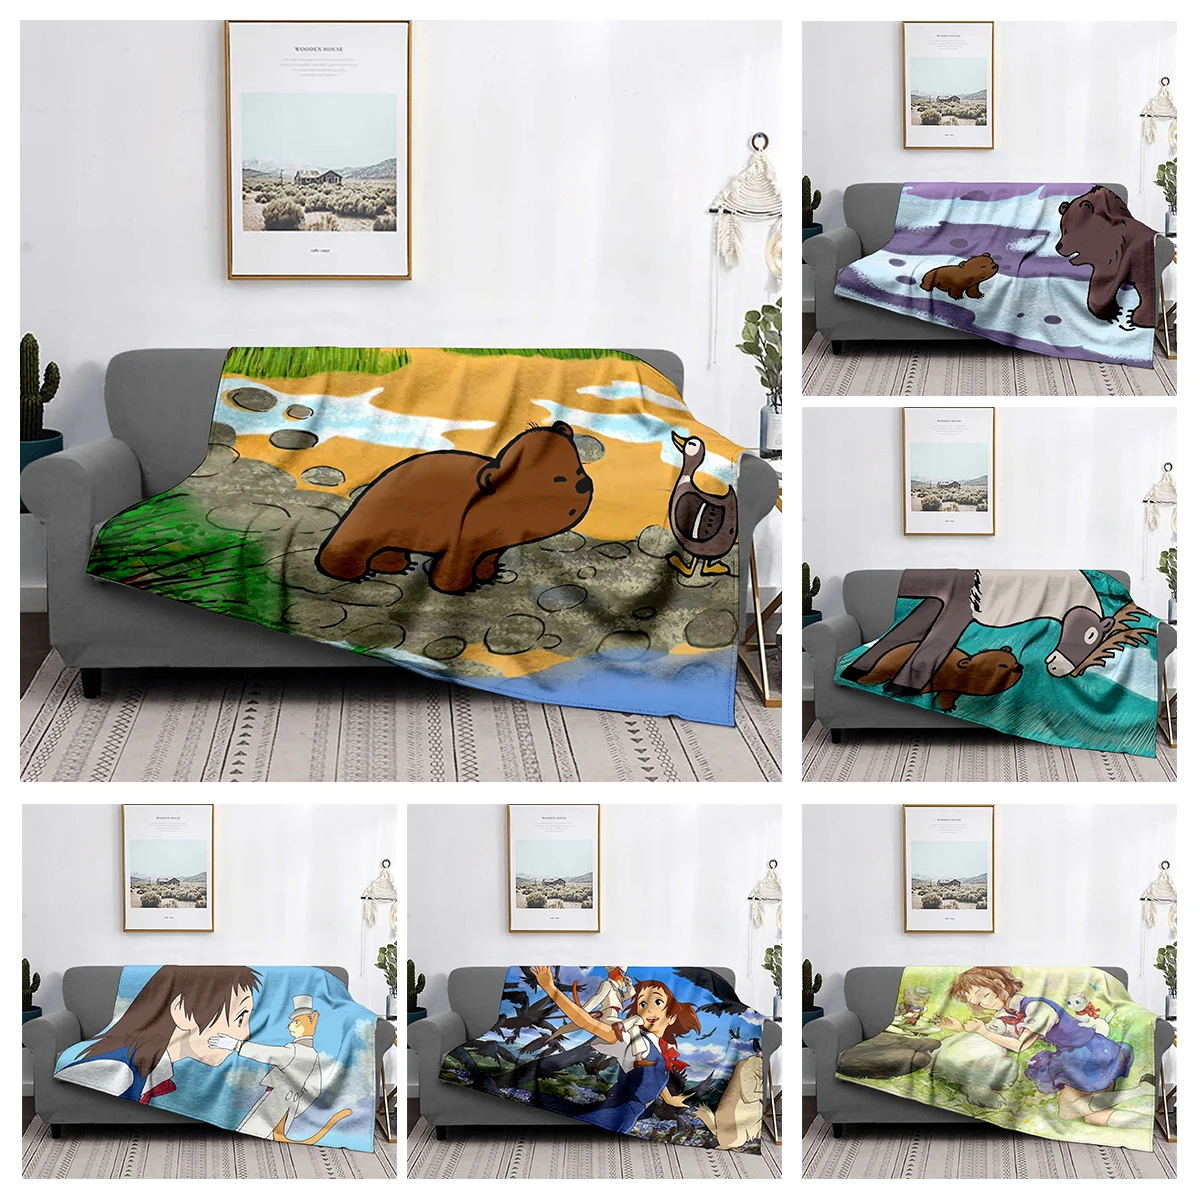 

Home decoration plush Sofa blanket Colorful Animal Bedspread on the bed anime fluffy soft blankets thick blanket for winte